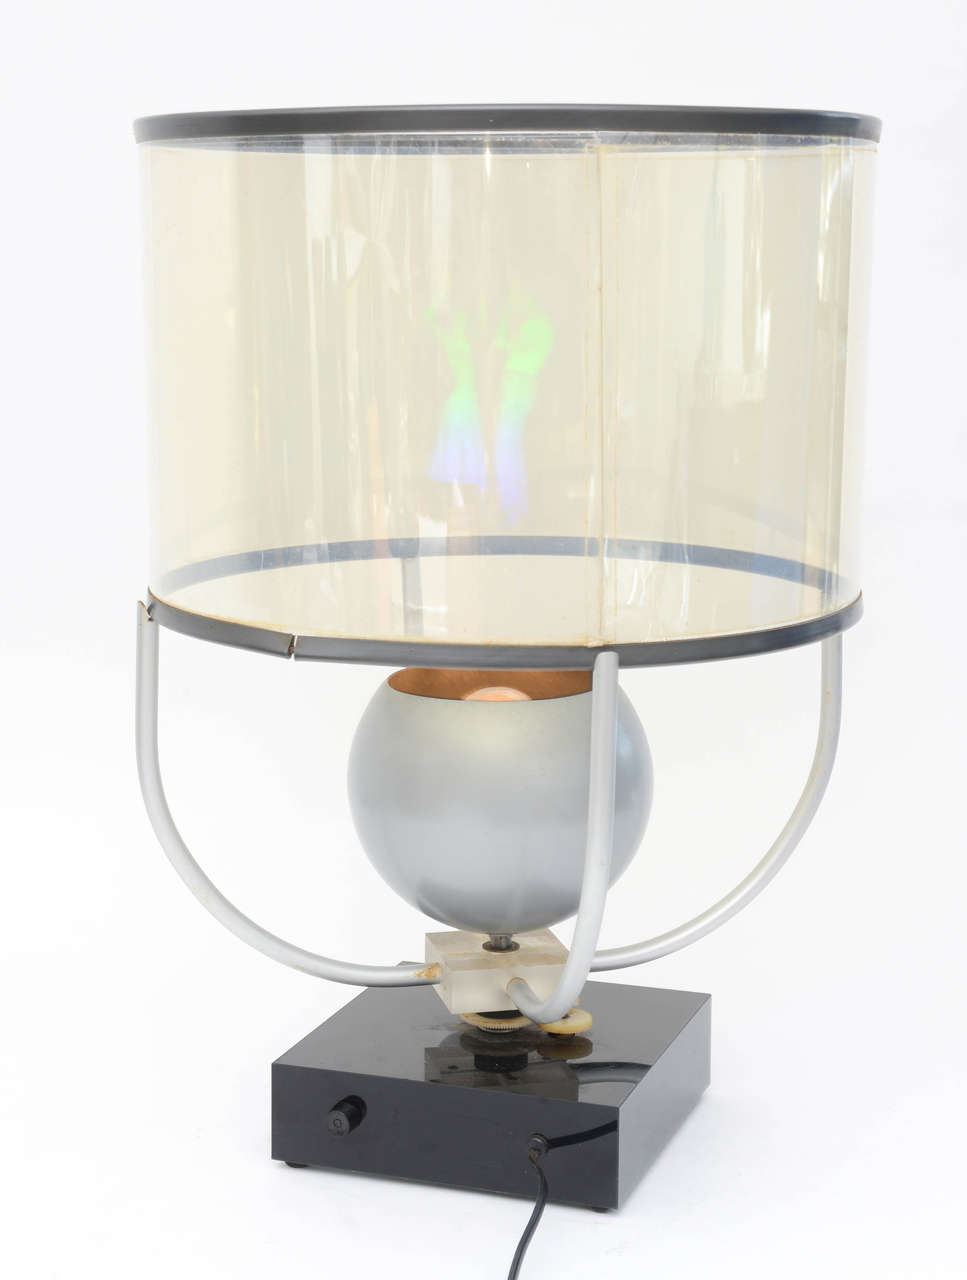 An all original hologram dating back from the 1970s. This piece came from an art, furniture collector that lived in Florida for the last 40 years and was downsizing his collection. This very cool lamp does not photograph that well. In person one can